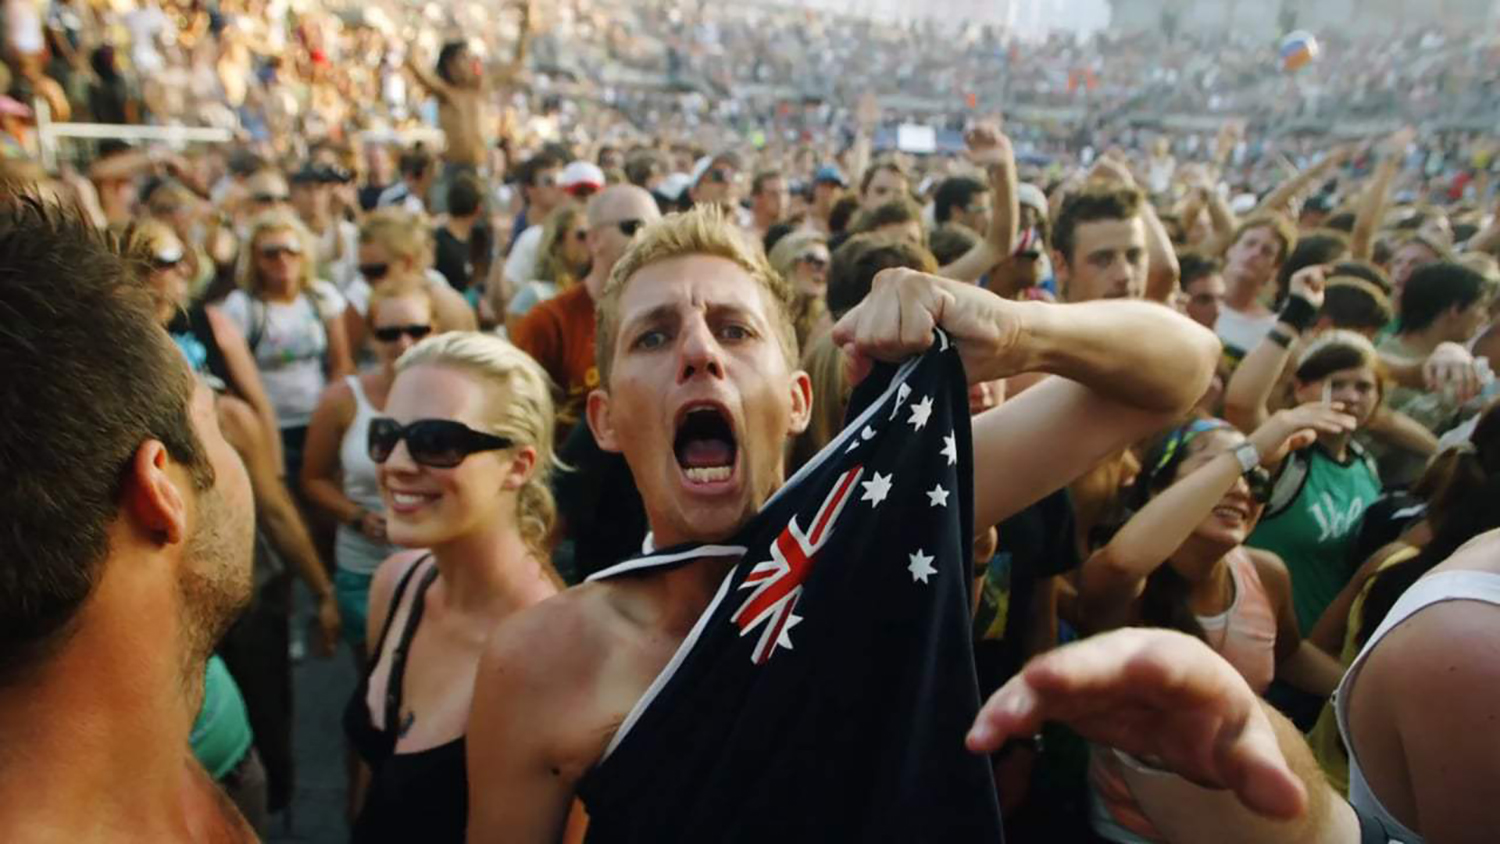 Australian person angrily shouts while gripping flag shirt